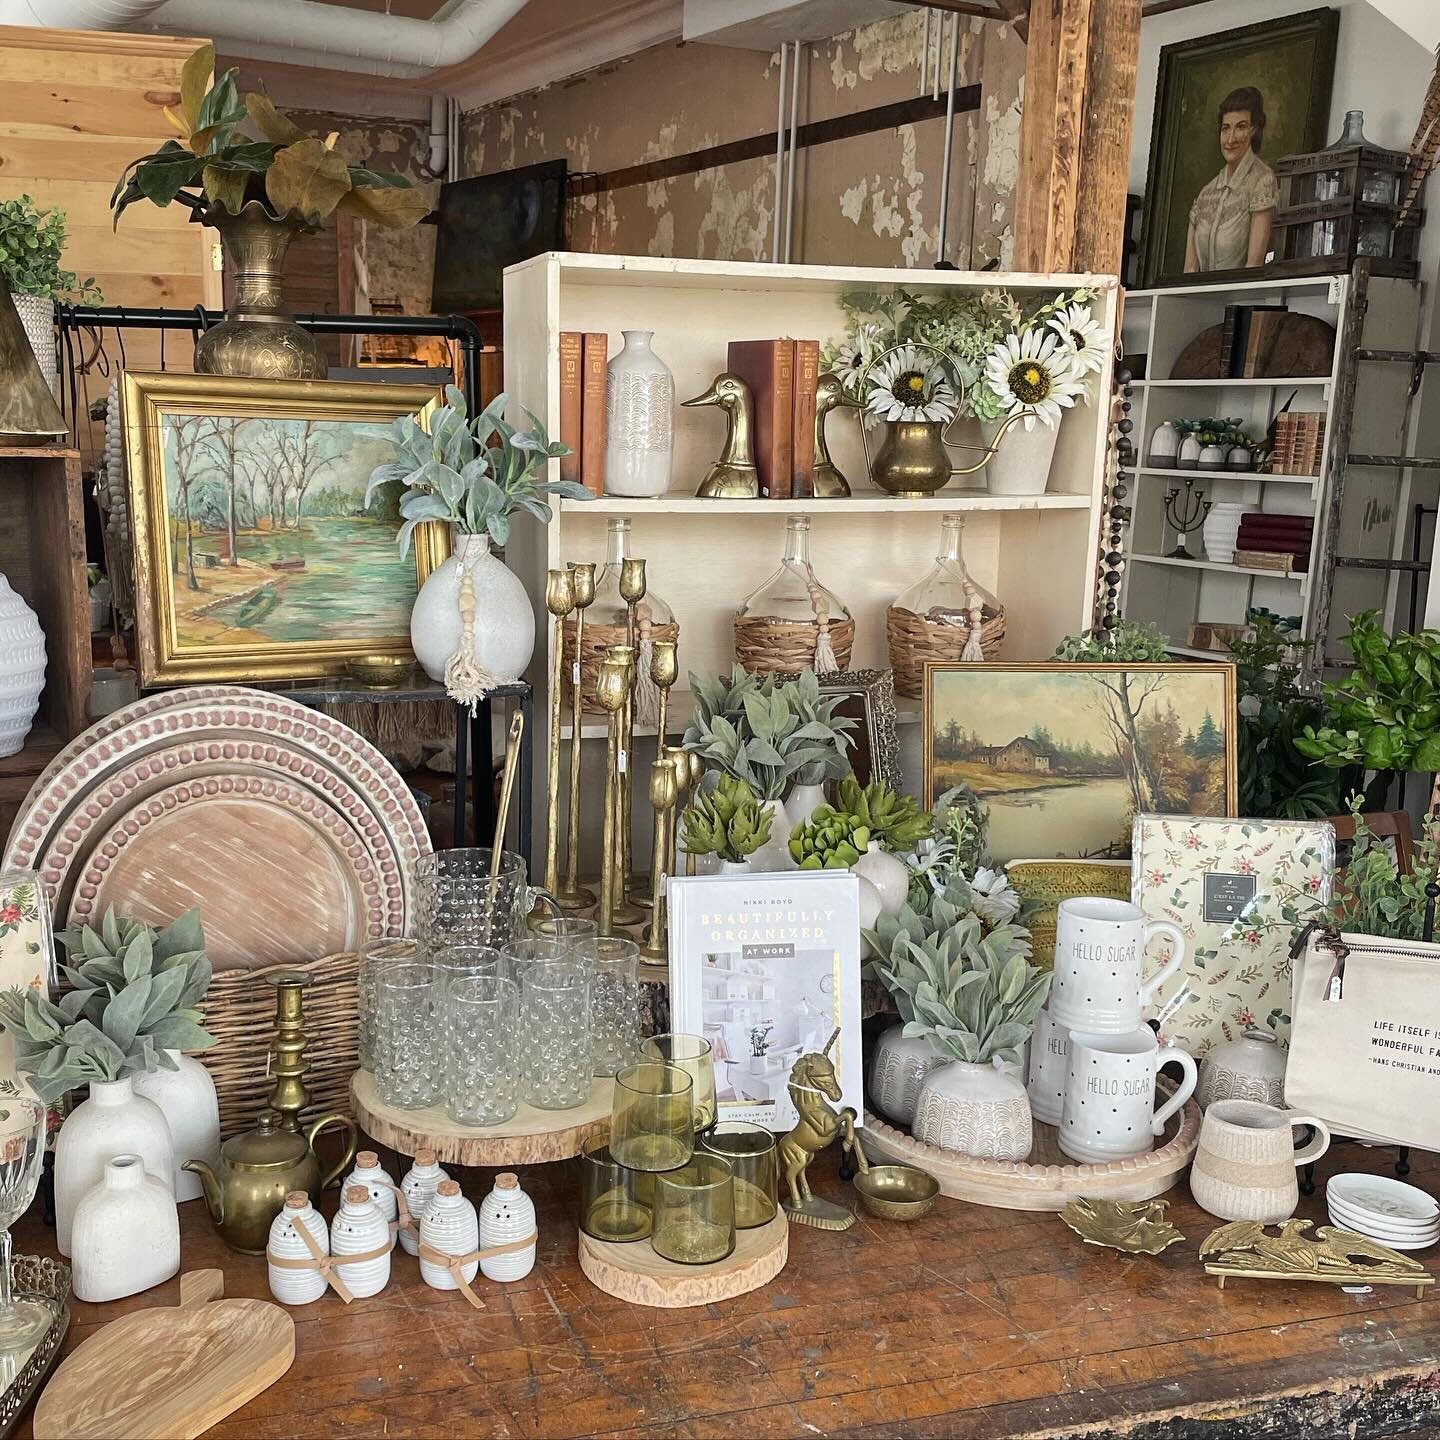 Happy Friday friends!! I&rsquo;m at the shop all weekend, I was able to add some fun new goodies for you guys, check out our stories for the most up-to-date pictures 😍 

#bluebirdhomedecor #shopsmall #vintageshop #schenectady